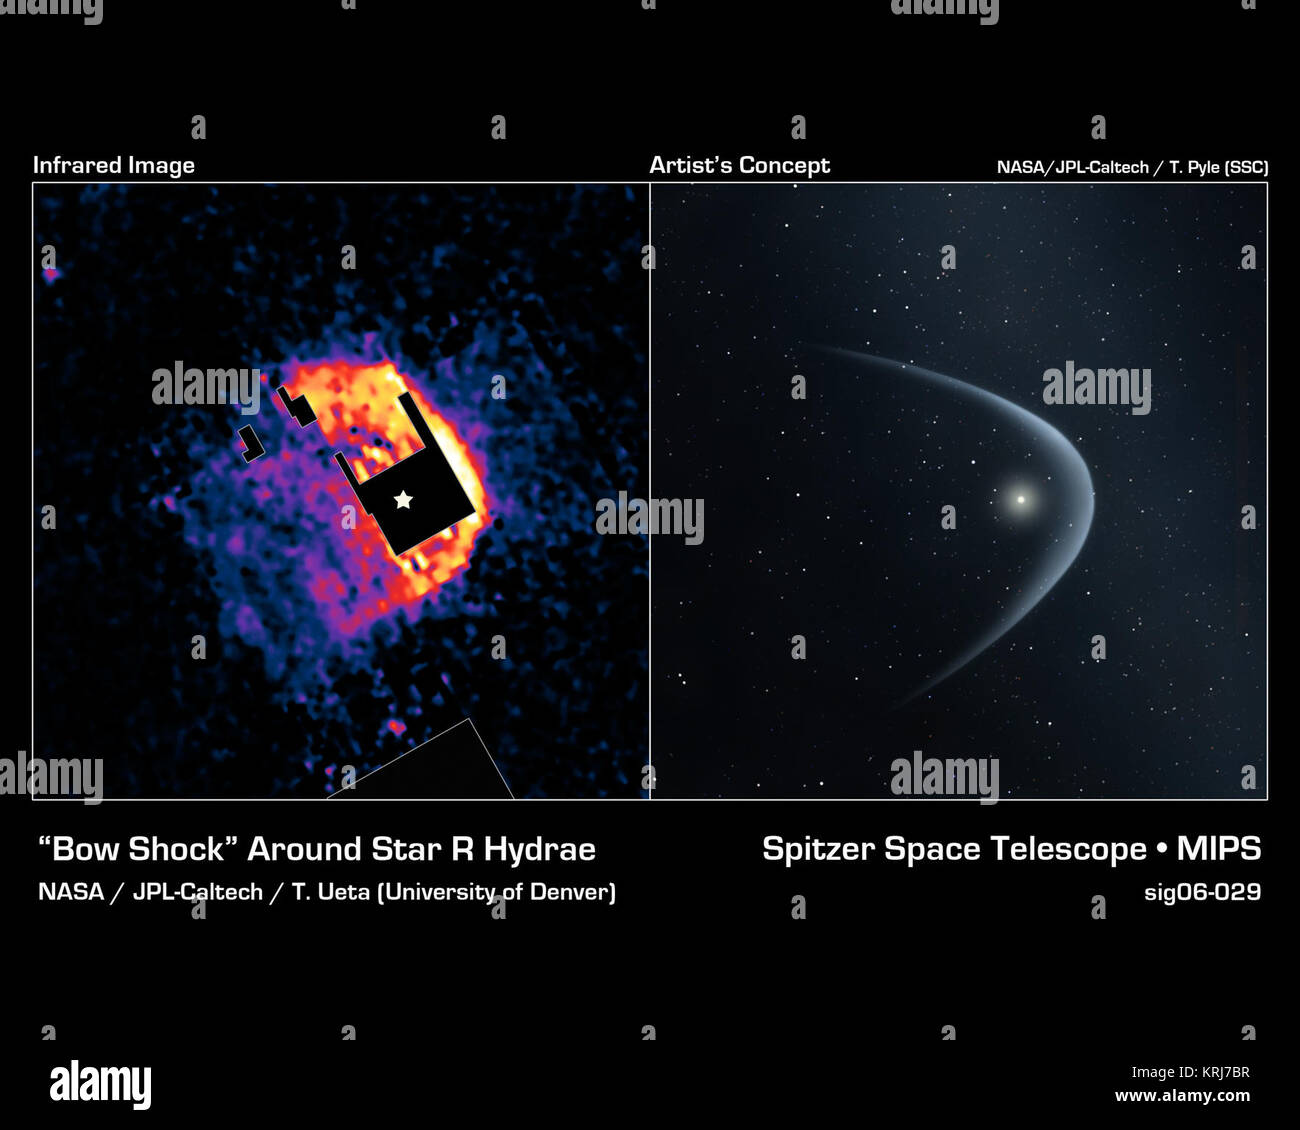 This image from the Spitzer Space Telescope (left panel) shows the 'bow shock' of a dying star named R Hydrae (R Hya) in the constellation Hydra.  Bow shocks are formed where the stellar wind from a star are pushed into a bow shape (illustration, right panel) as the star plunges through the gas and dust between stars. Our own Sun has a bow shock, but prior to this image one had never been observed around this particular class of red giant star.  R Hya moves through space at approximately 50 kilometers per second. As it does so, it discharges dust and gas into space. Because the star is relativ Stock Photo